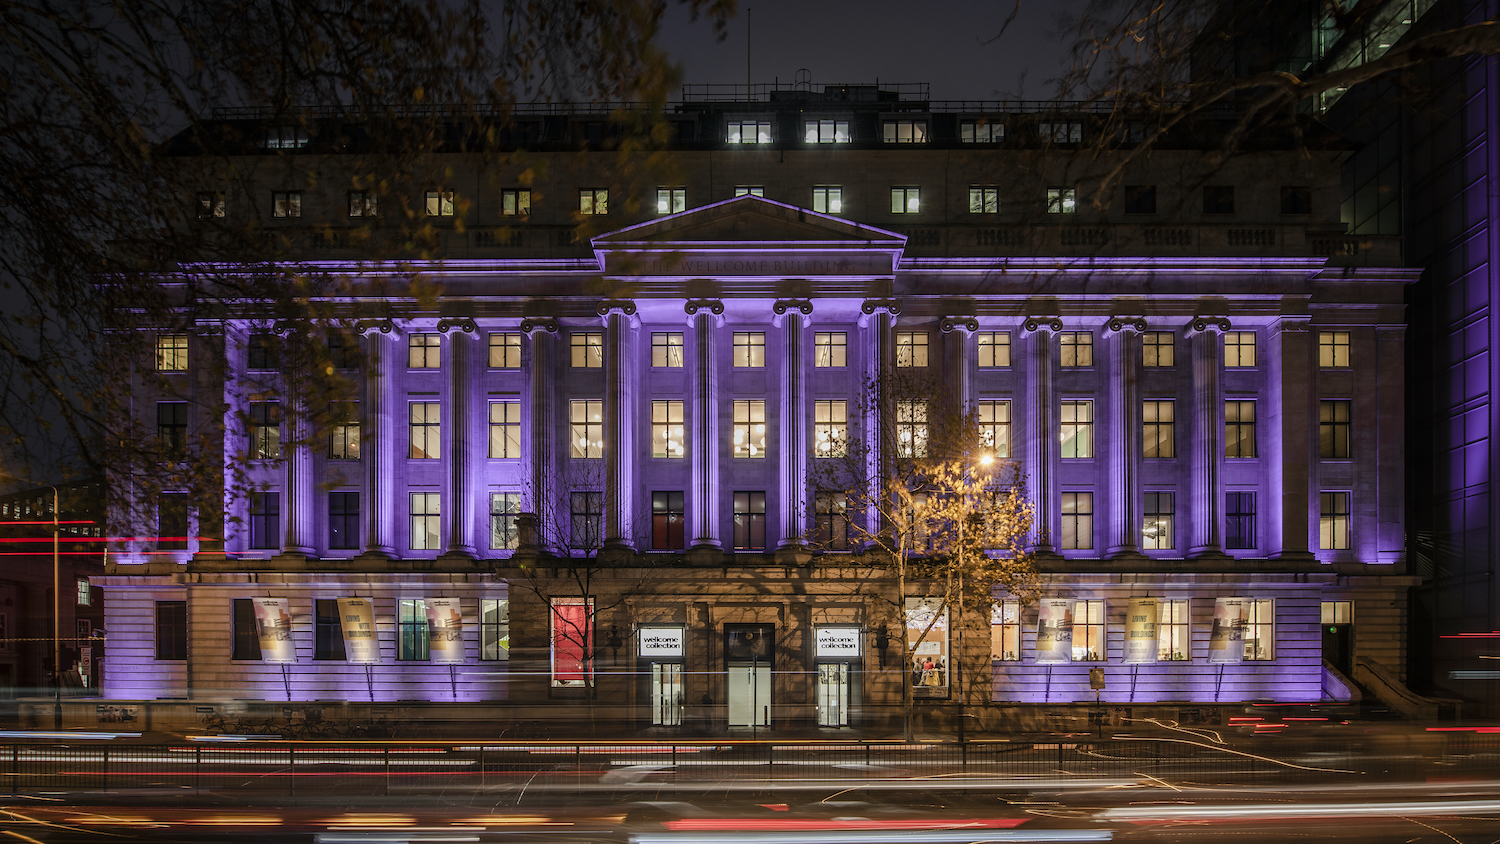 Wellcome Collection. Exterior building lit up in purple to recognise International Day of Persons with Disabilities / PurpleLightUp campaign. Photo courtesy of Wellcome Collection.